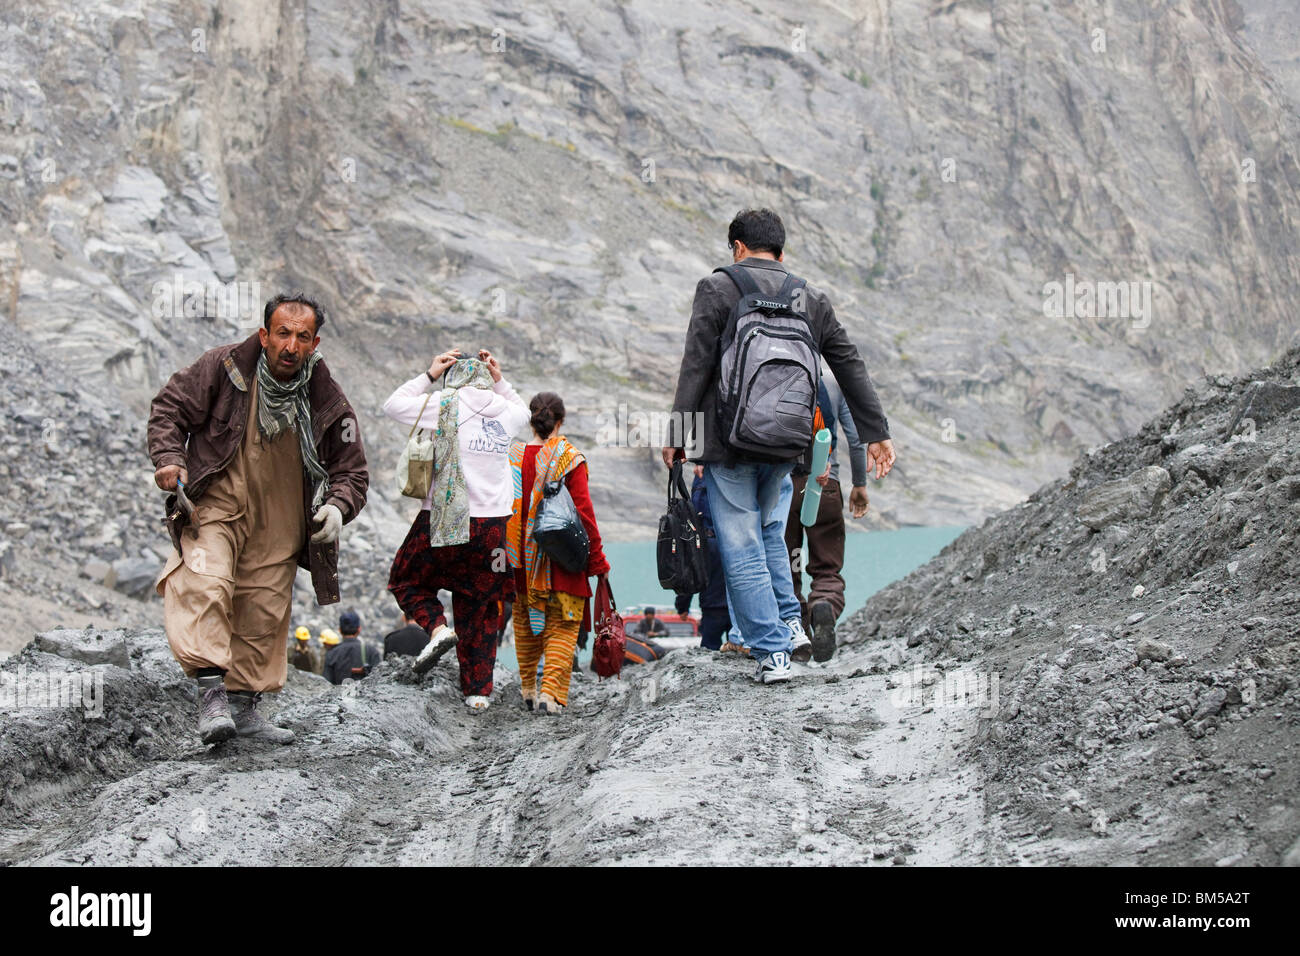 Workers at the landslide area at Attabad which blocks the Karakoram Highway, Hunza, Pakistan Stock Photo